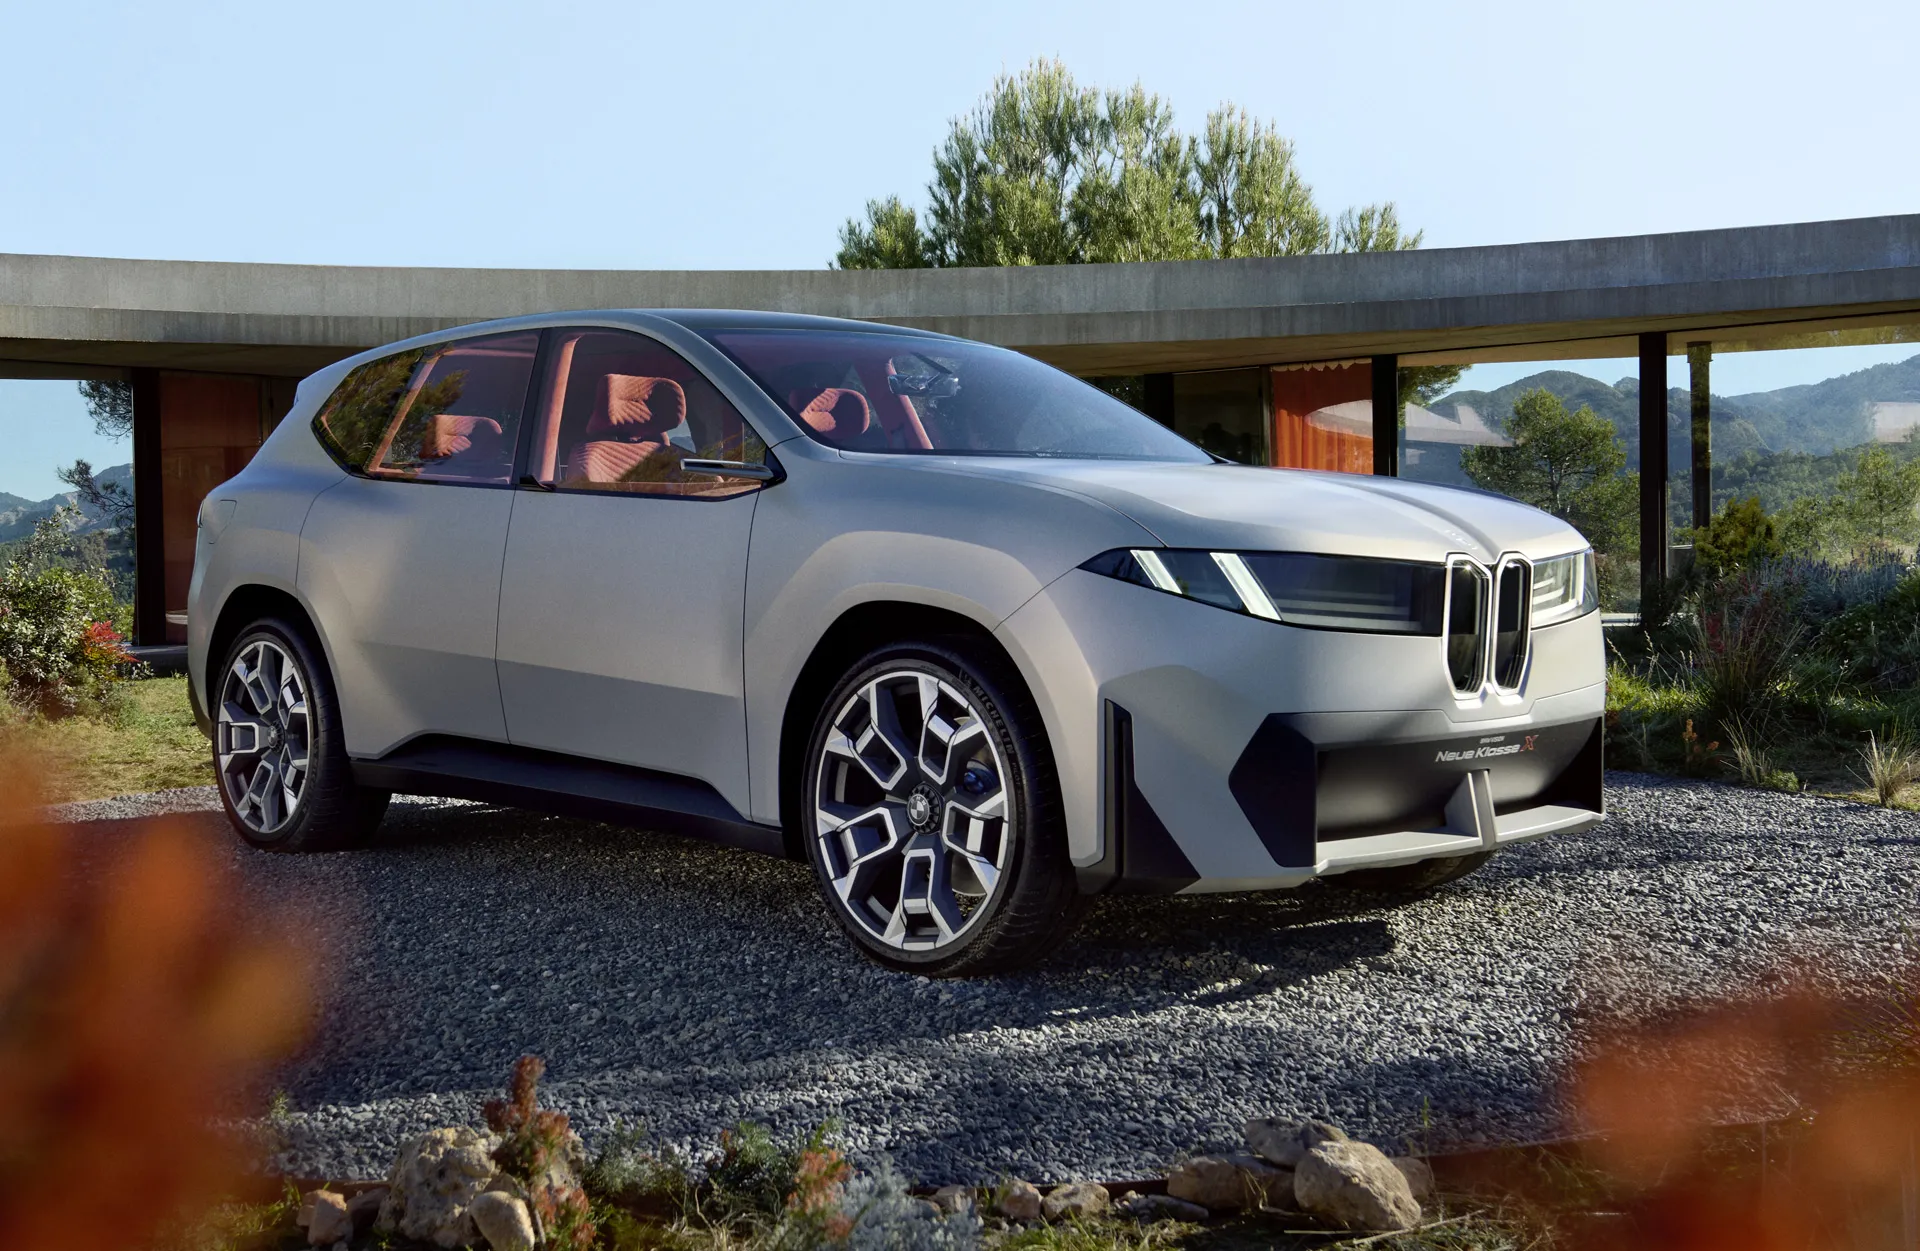 BMW previews future electric SUV with faster charging, more range